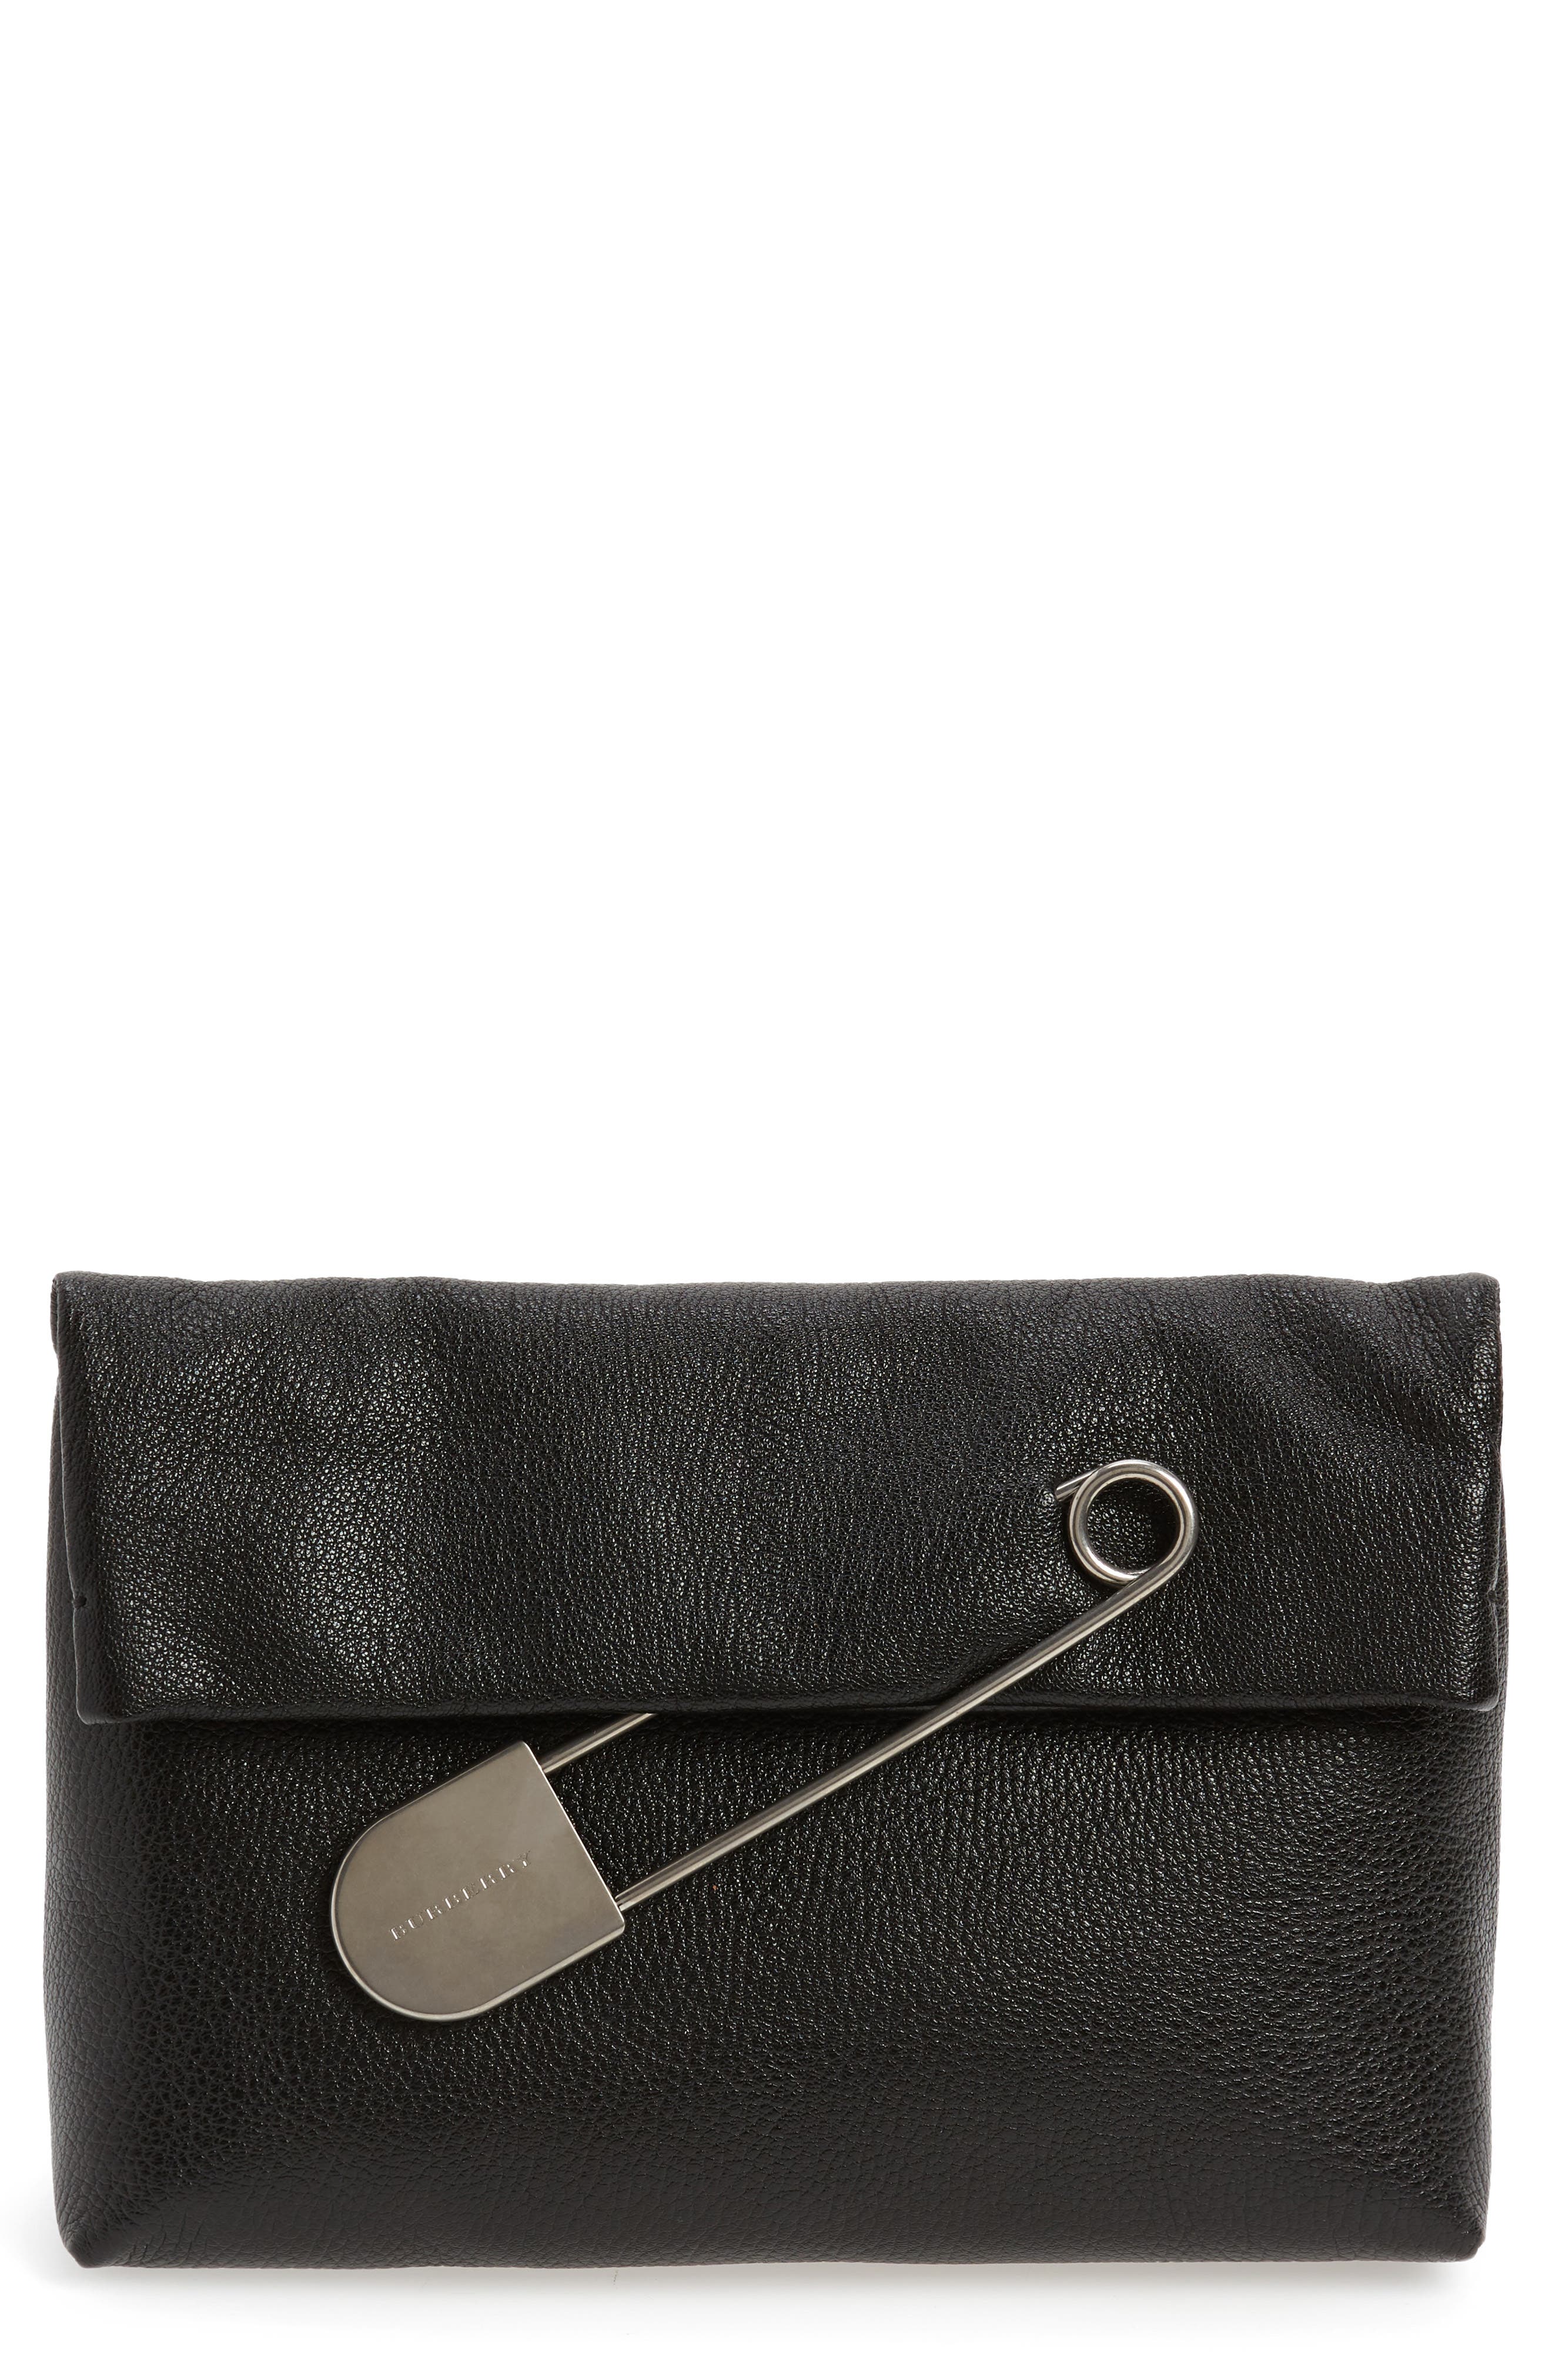 Safety Pin Leather Clutch 